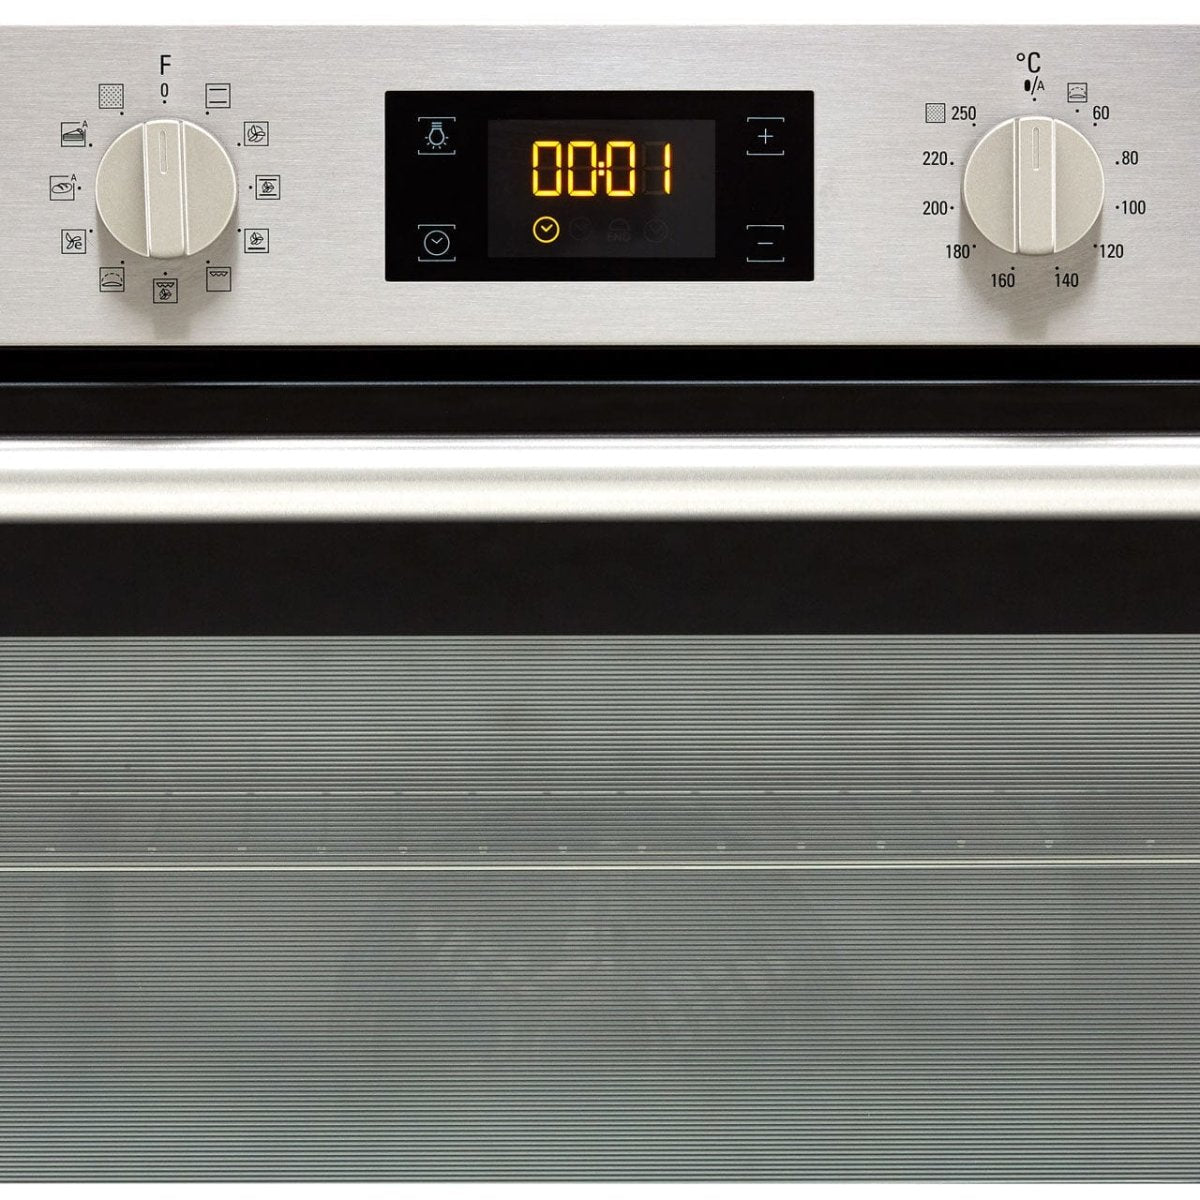 Hotpoint SA2840PIX Built In Electric Single Oven-Stainless Steel-A+ Rated - Atlantic Electrics